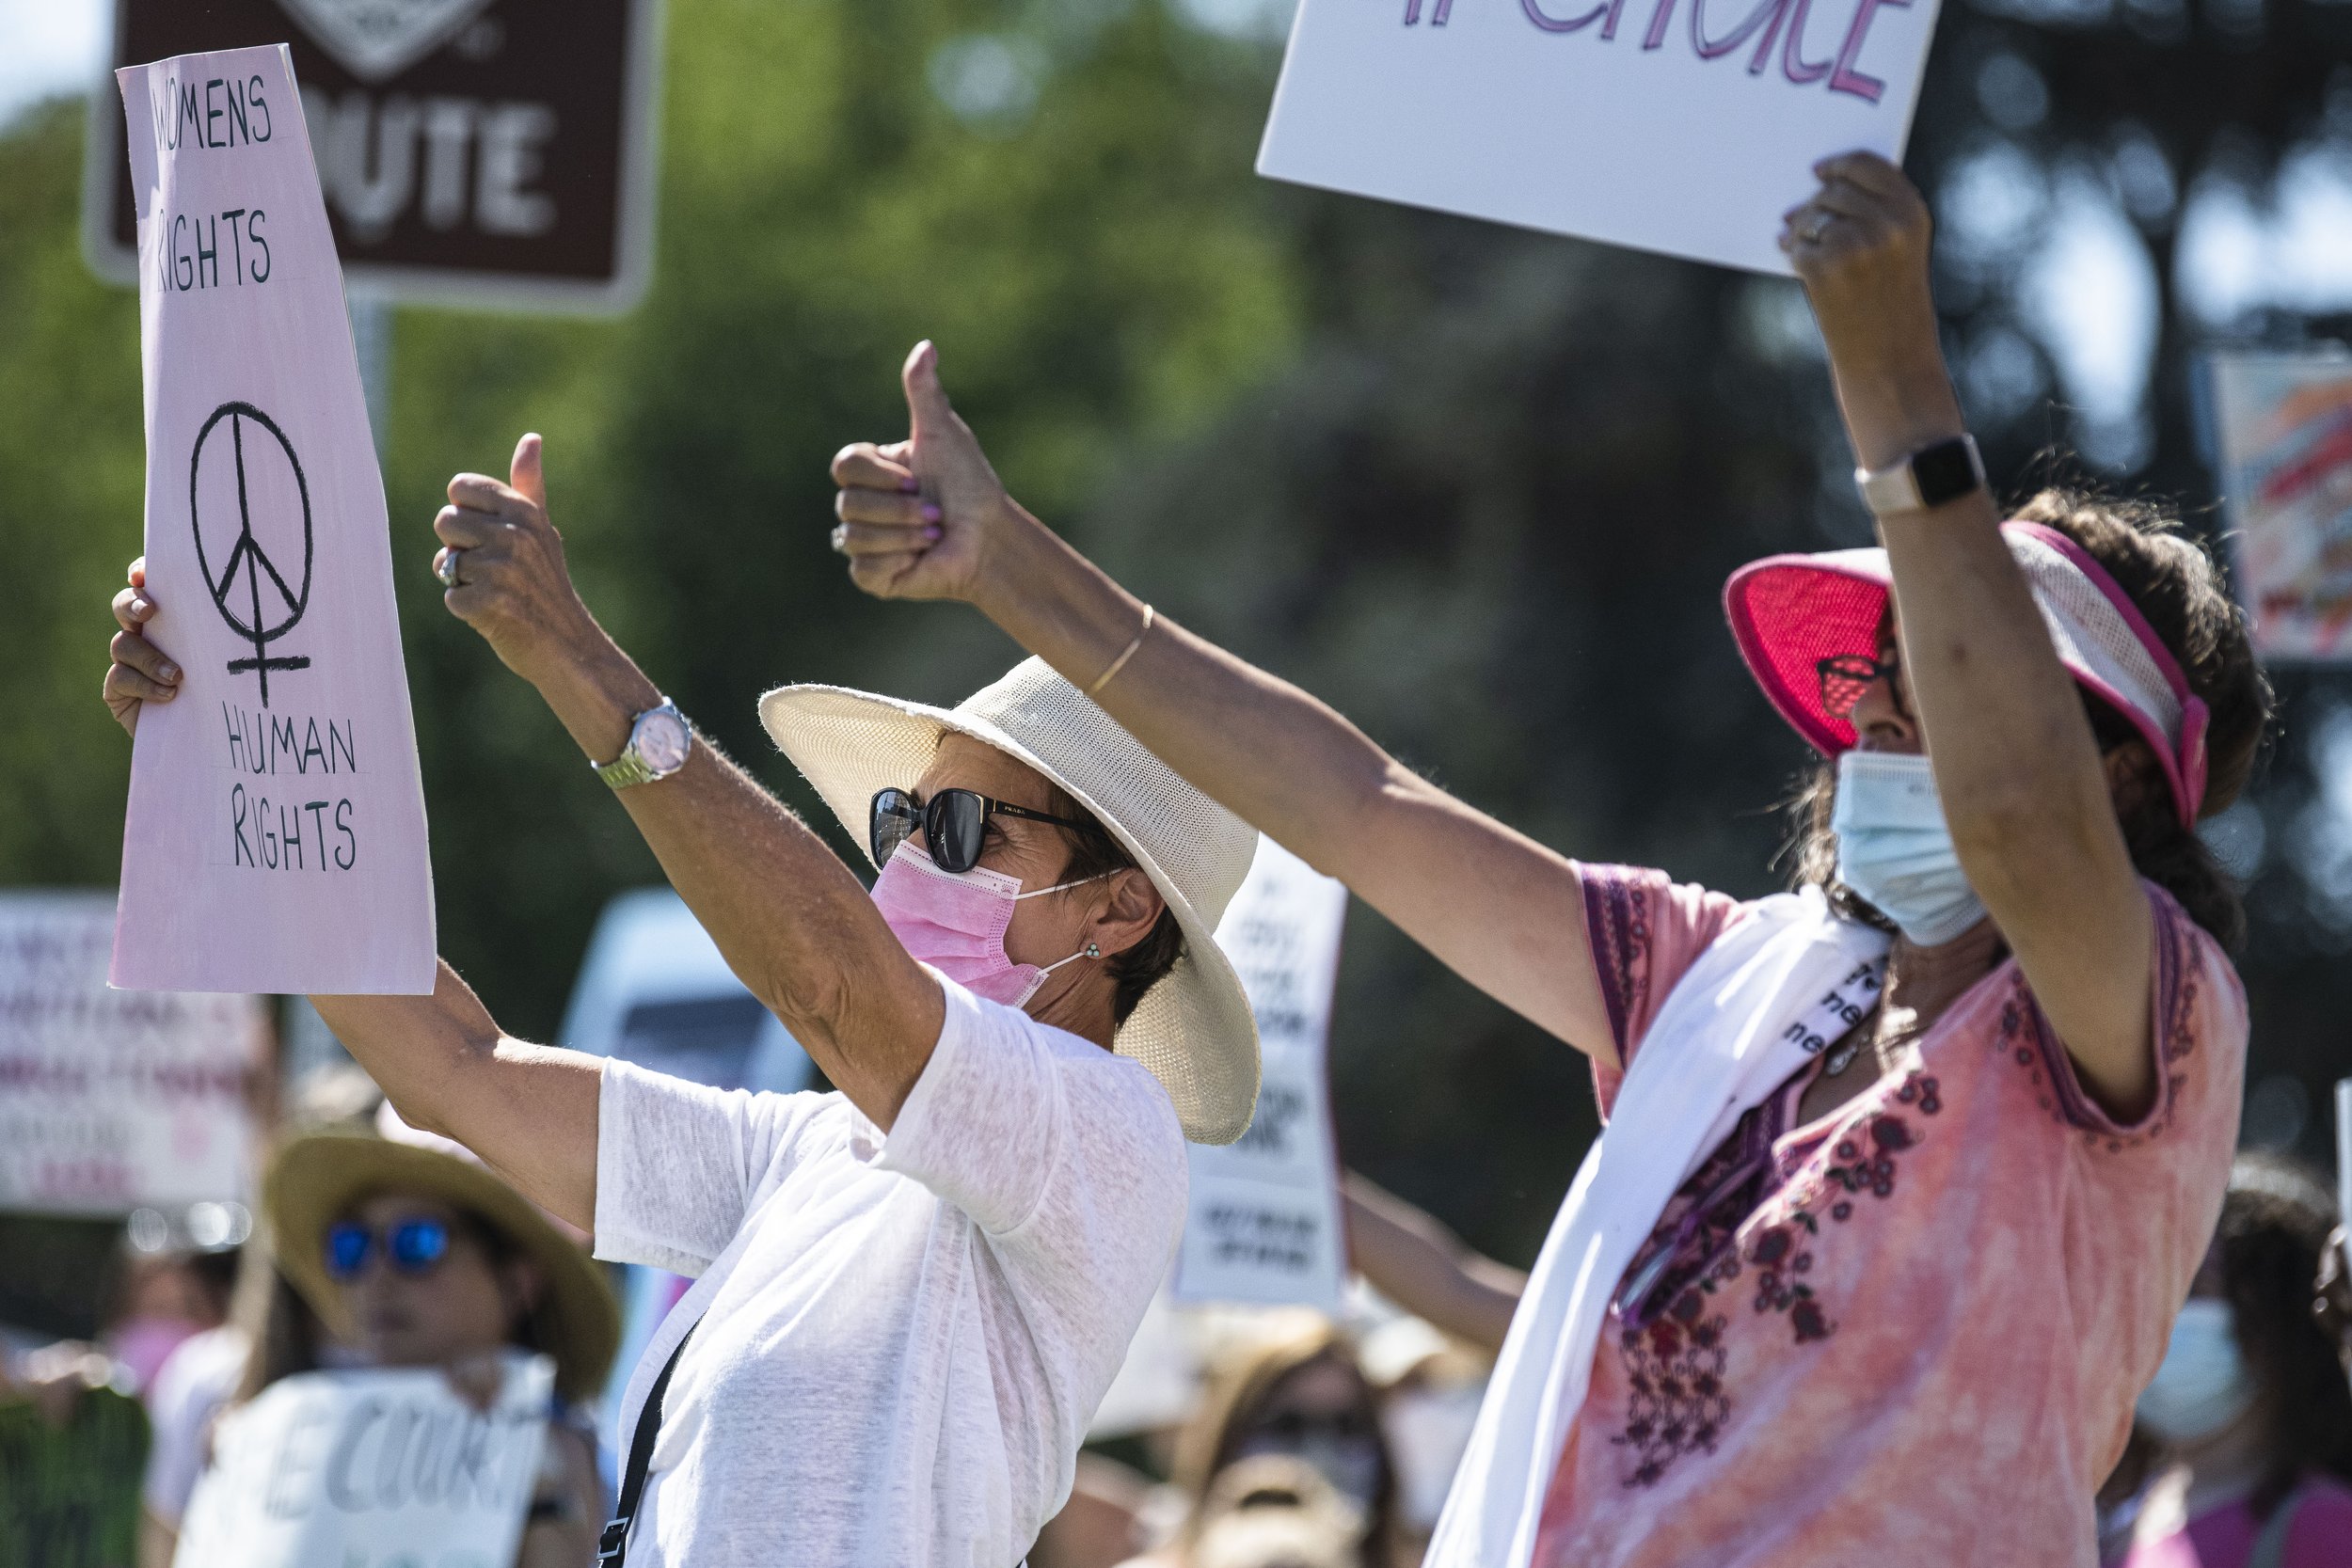  A supporter of the Womens abortion march held at the Beverly Gardens Park located in Beverly Hills, Calif. Sat. Oct. 2, stands with her sign in support of the current abortion situation currently happening in Texas. (Jon Putman | The Corsair) 